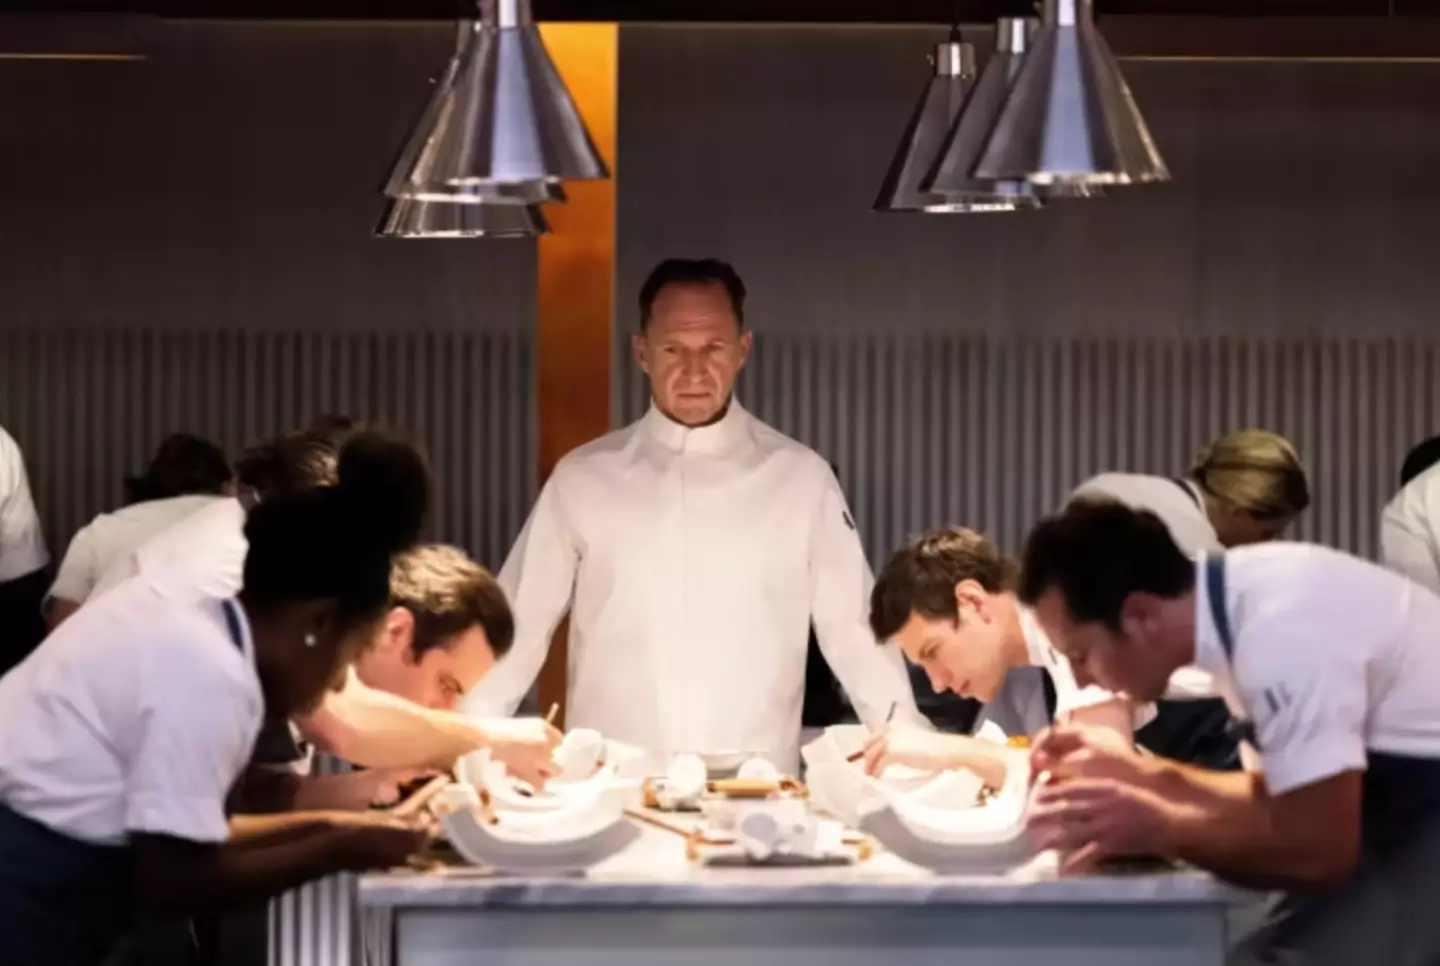 Can you imagine Lord Voldemort as a chef?